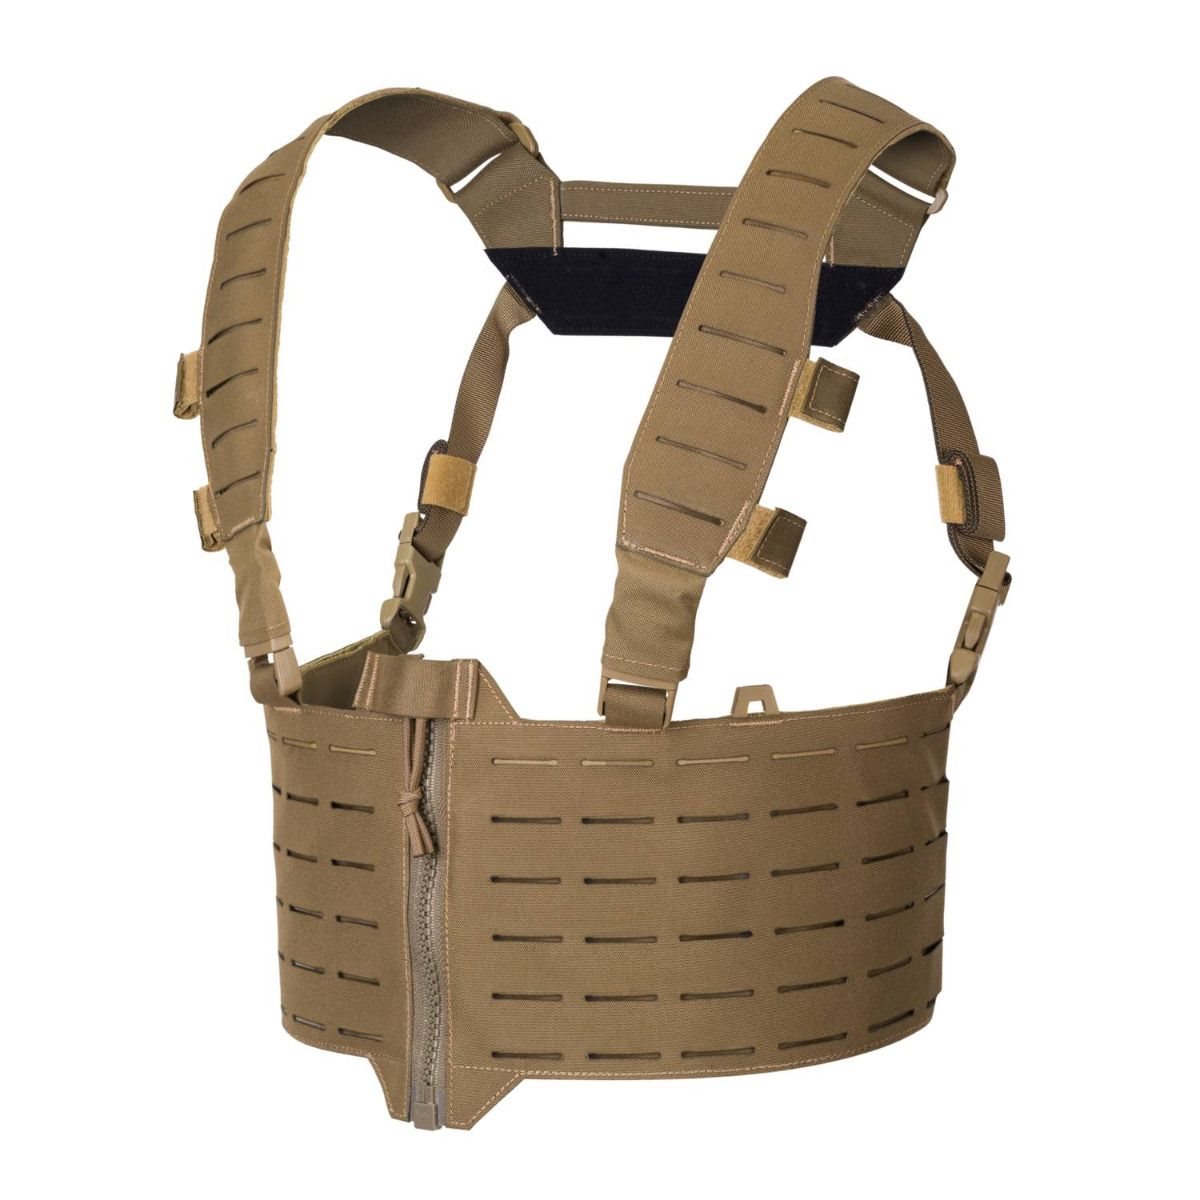 DIRECT ACTION WARWICK ZIP FRONT CHEST RIG COYOTE | Army surplus ...